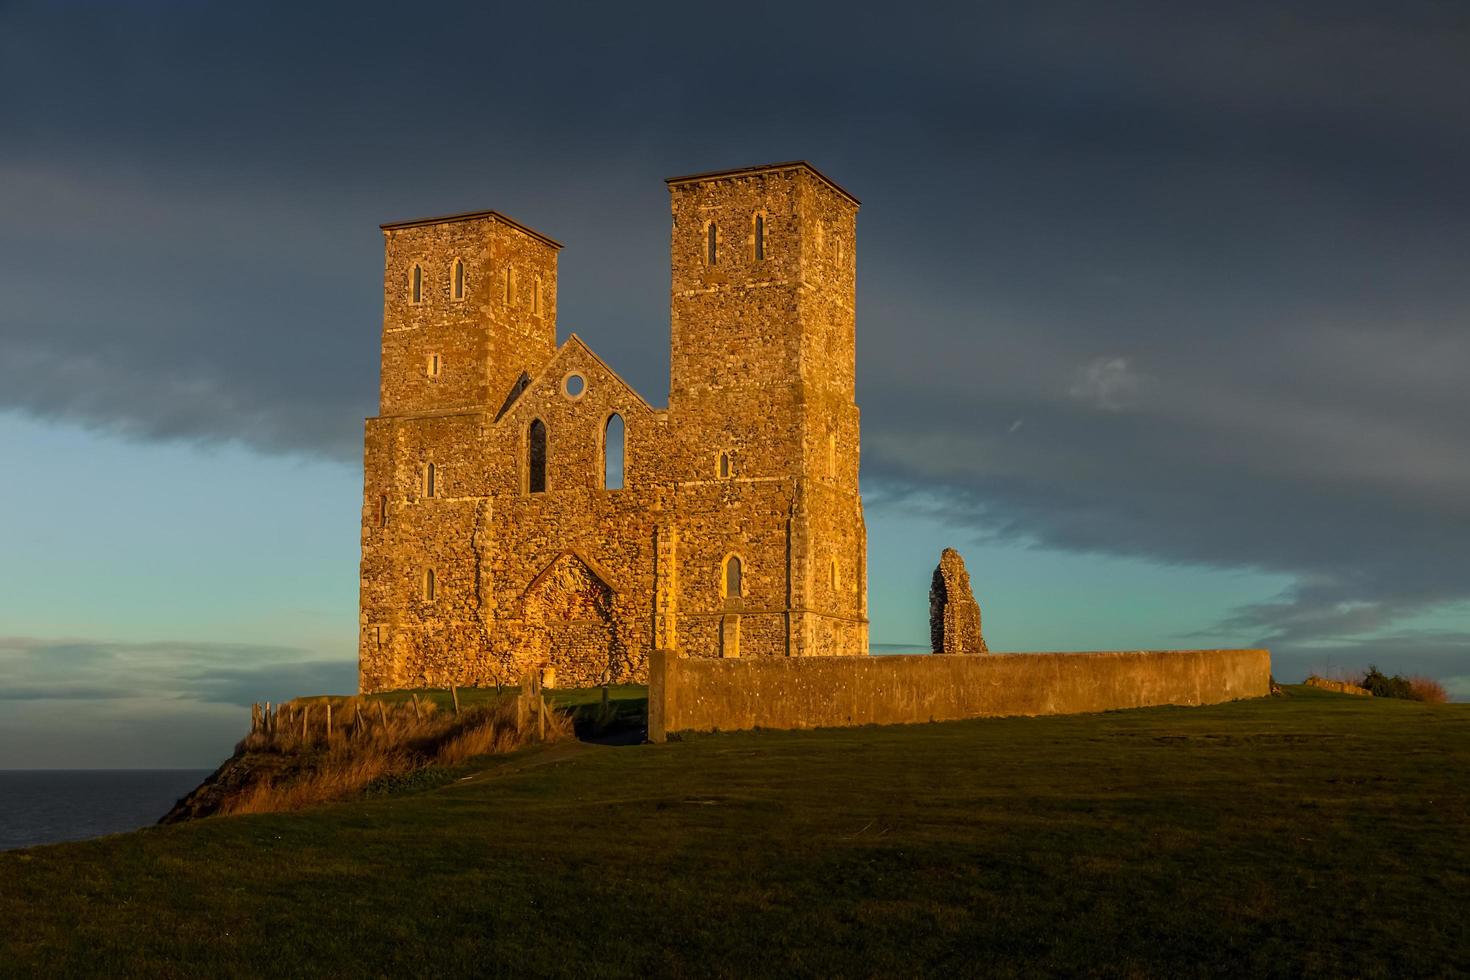 Remains of Reculver Church Towers Bathed in Late Afternoon Sun in Winter at Reculver in Kent on December 10, 2008 photo